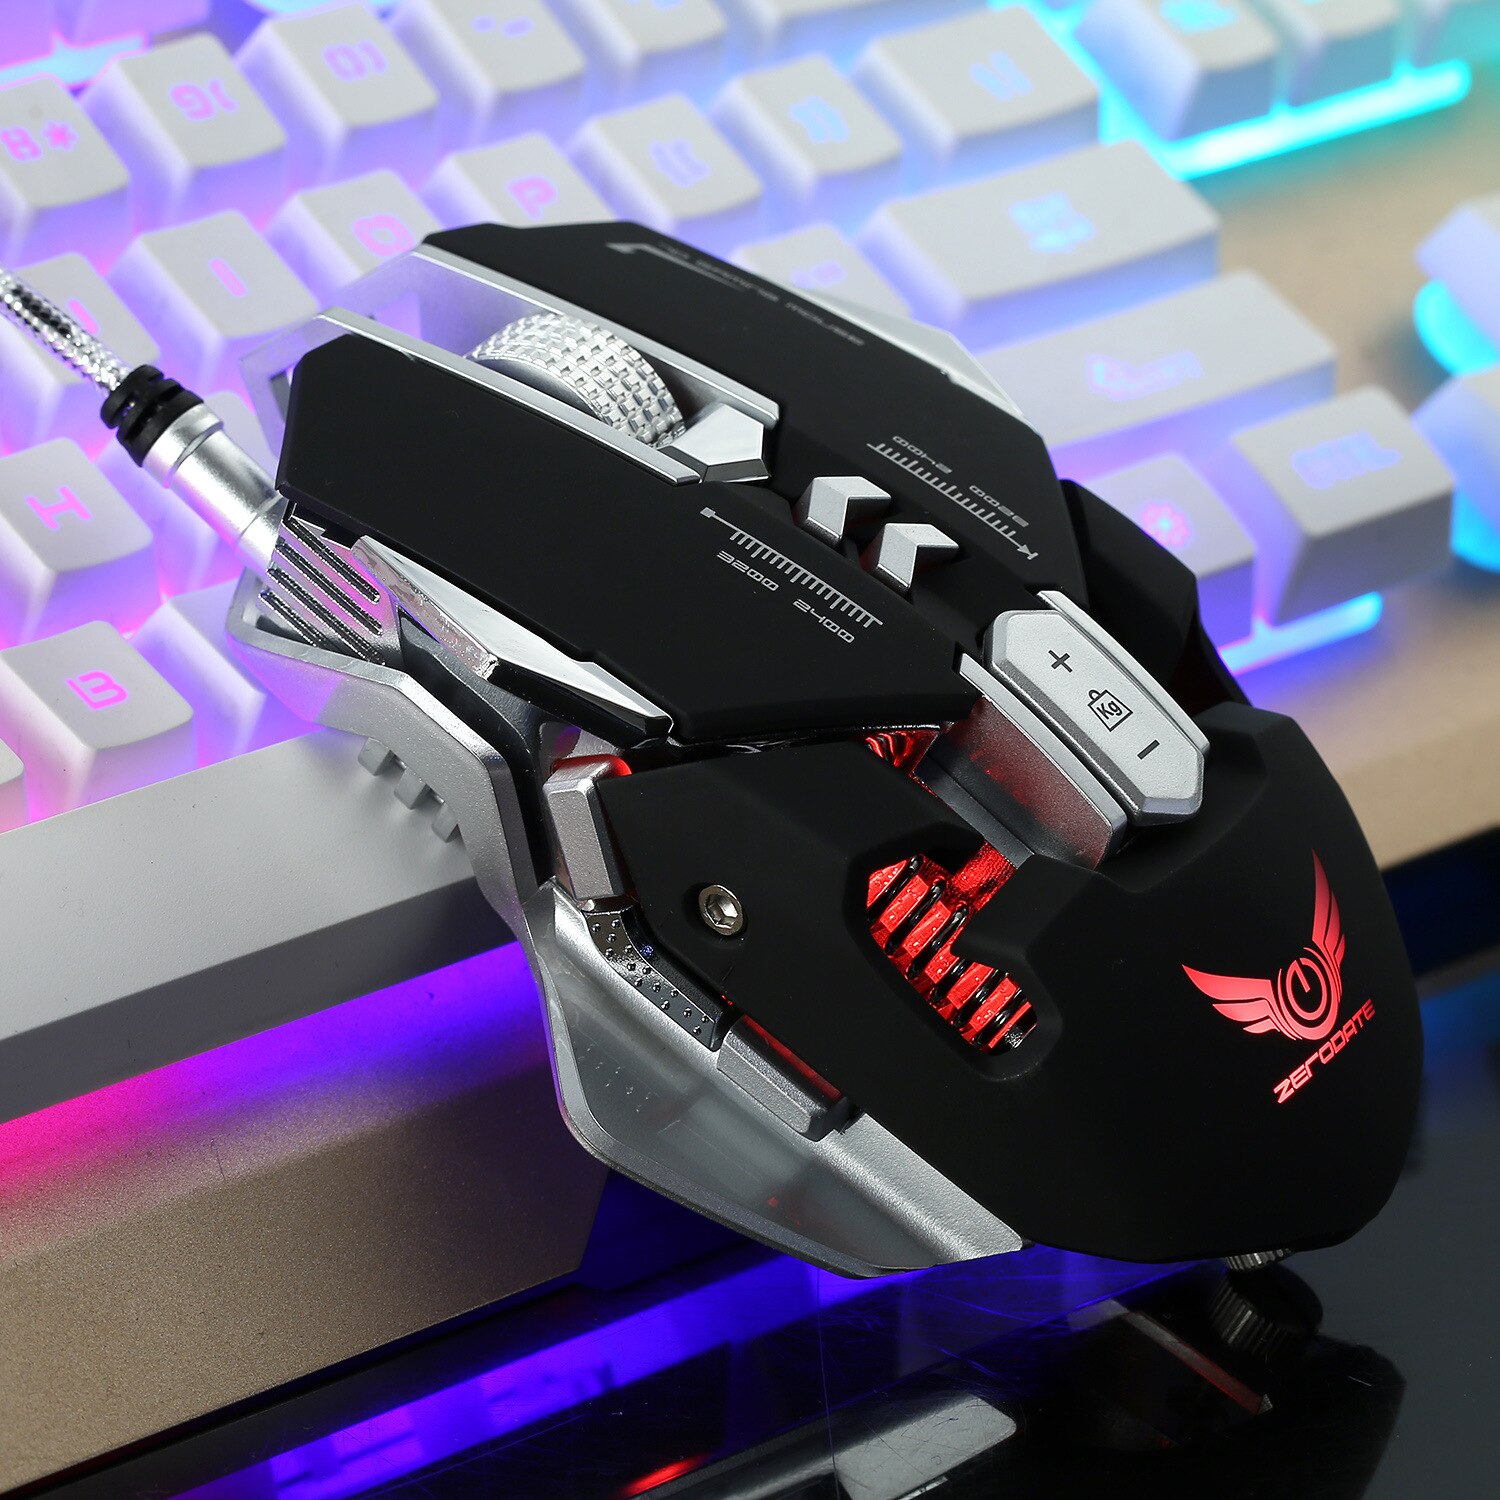 ZERODATE 2019 Professional Optical Programmable Wired LED Gaming Mouse Adjustable 3200 DPI Beetle Creative 3D 7 Button Mice